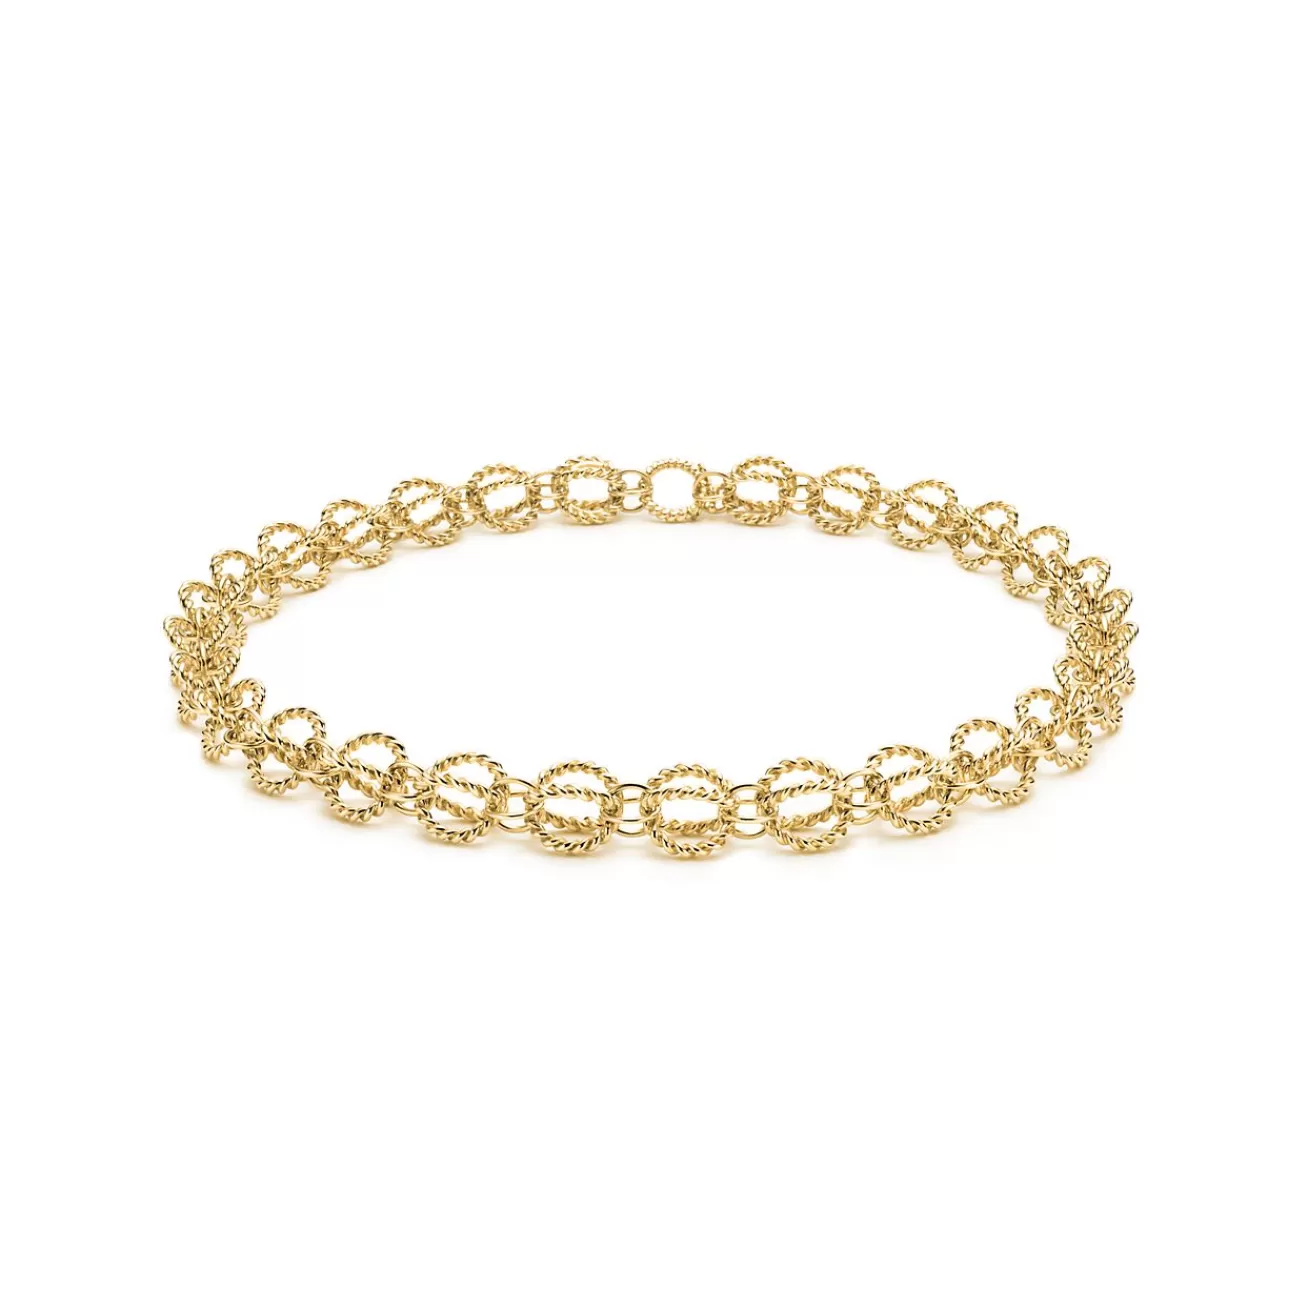 Tiffany & Co. Schlumberger® Circle Rope necklace in 18k gold. | ^ Necklaces & Pendants | Gold Jewelry